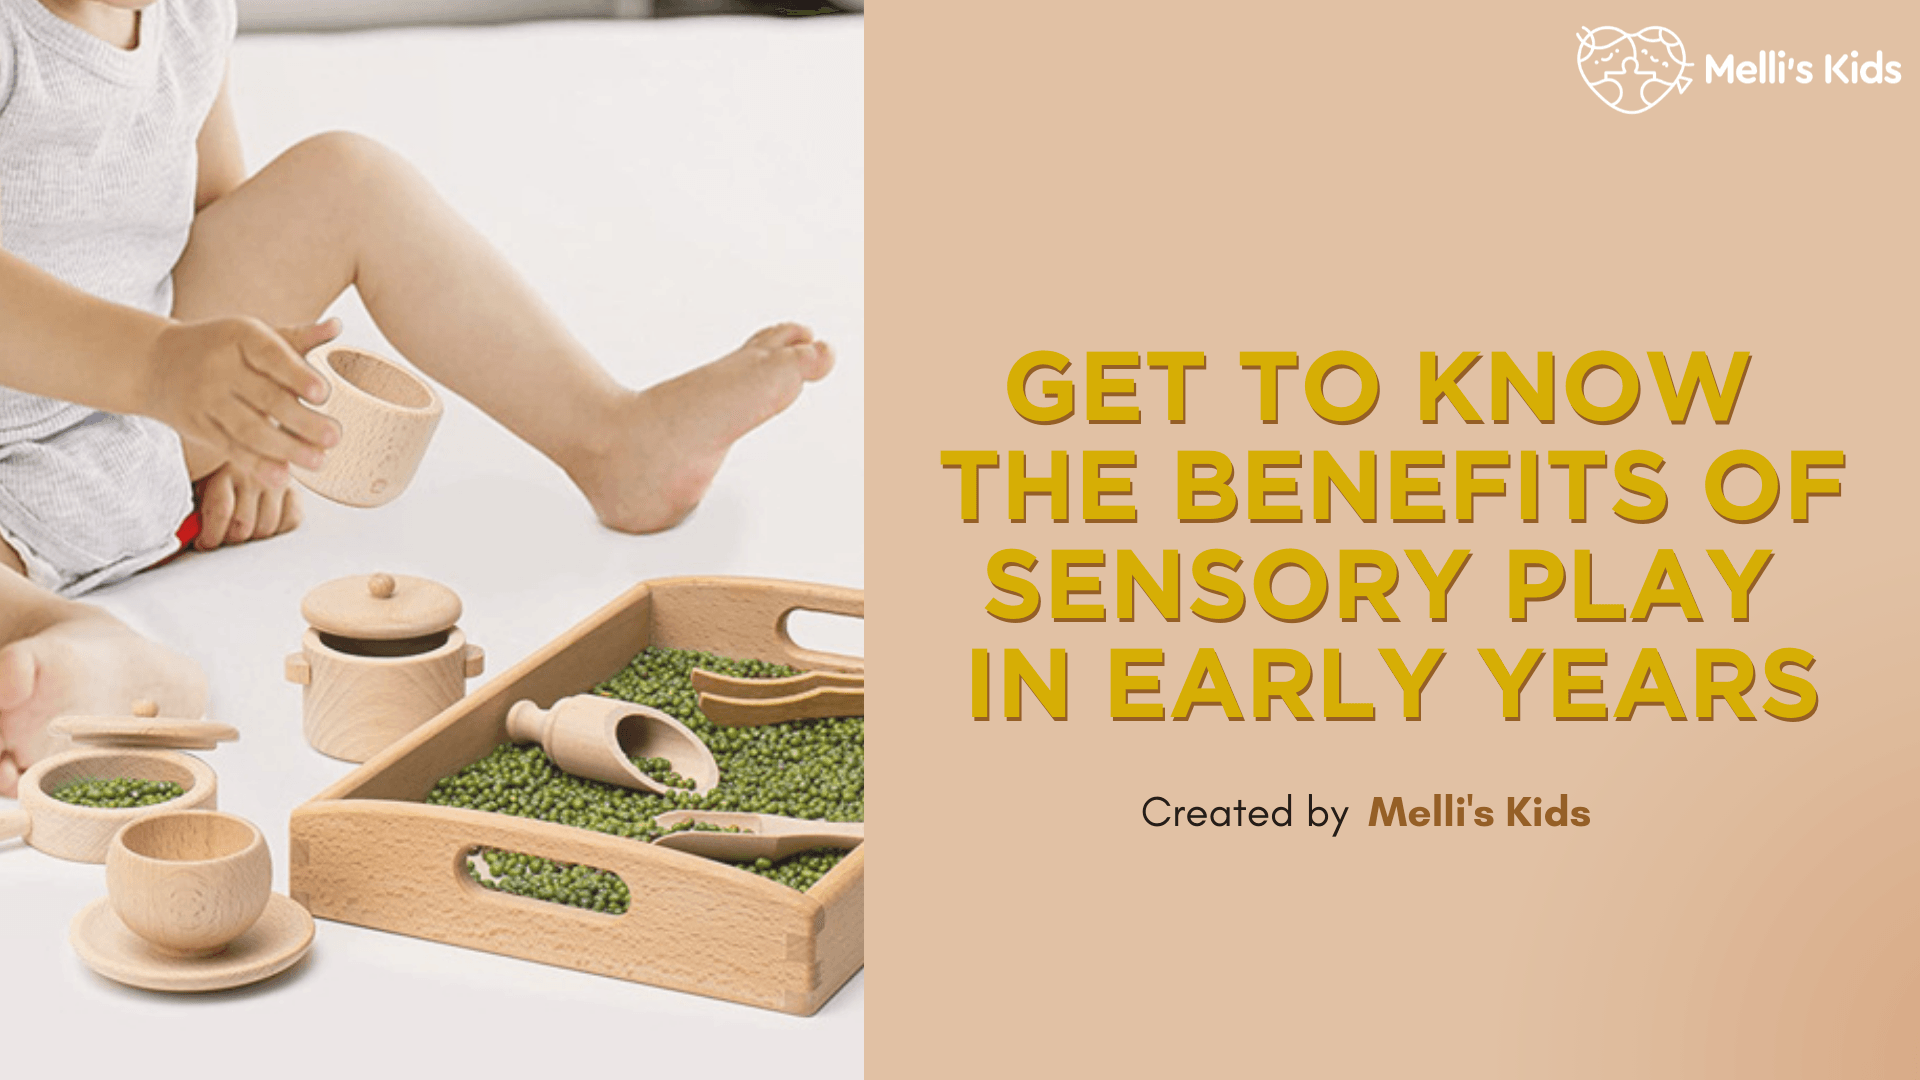 Get to know the benefits of sensory play in early years - Melli's Kids